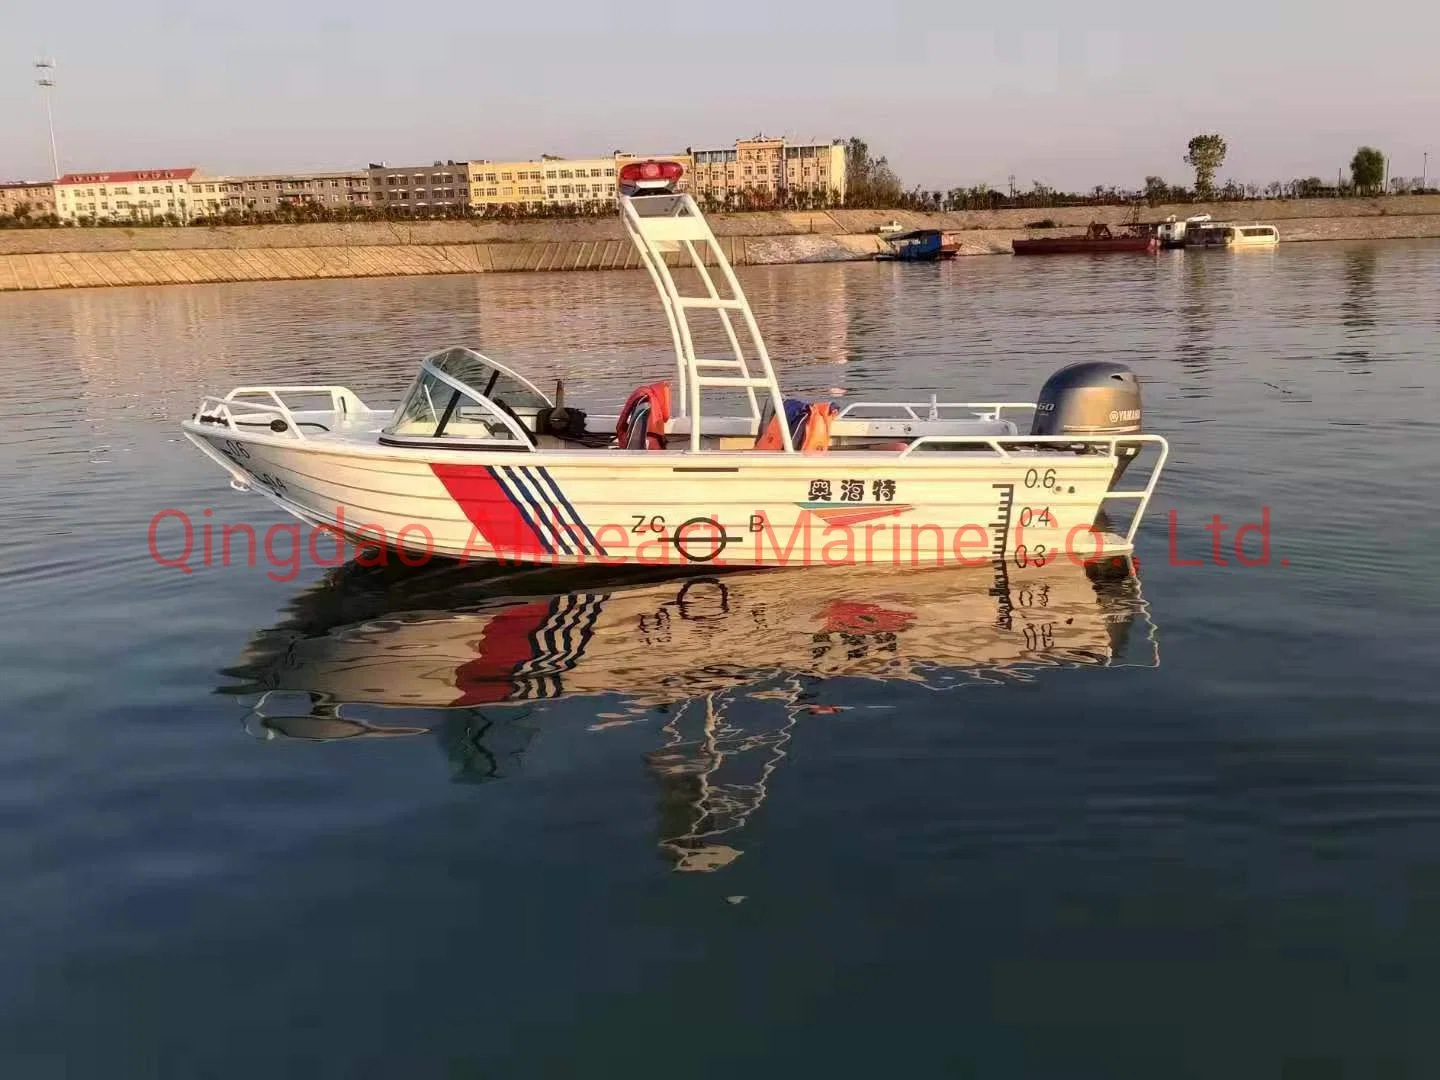 Pressed Hull 5.8m/19FT Runabout Fishing Boat with Bimini for Sale From Allheart Marine